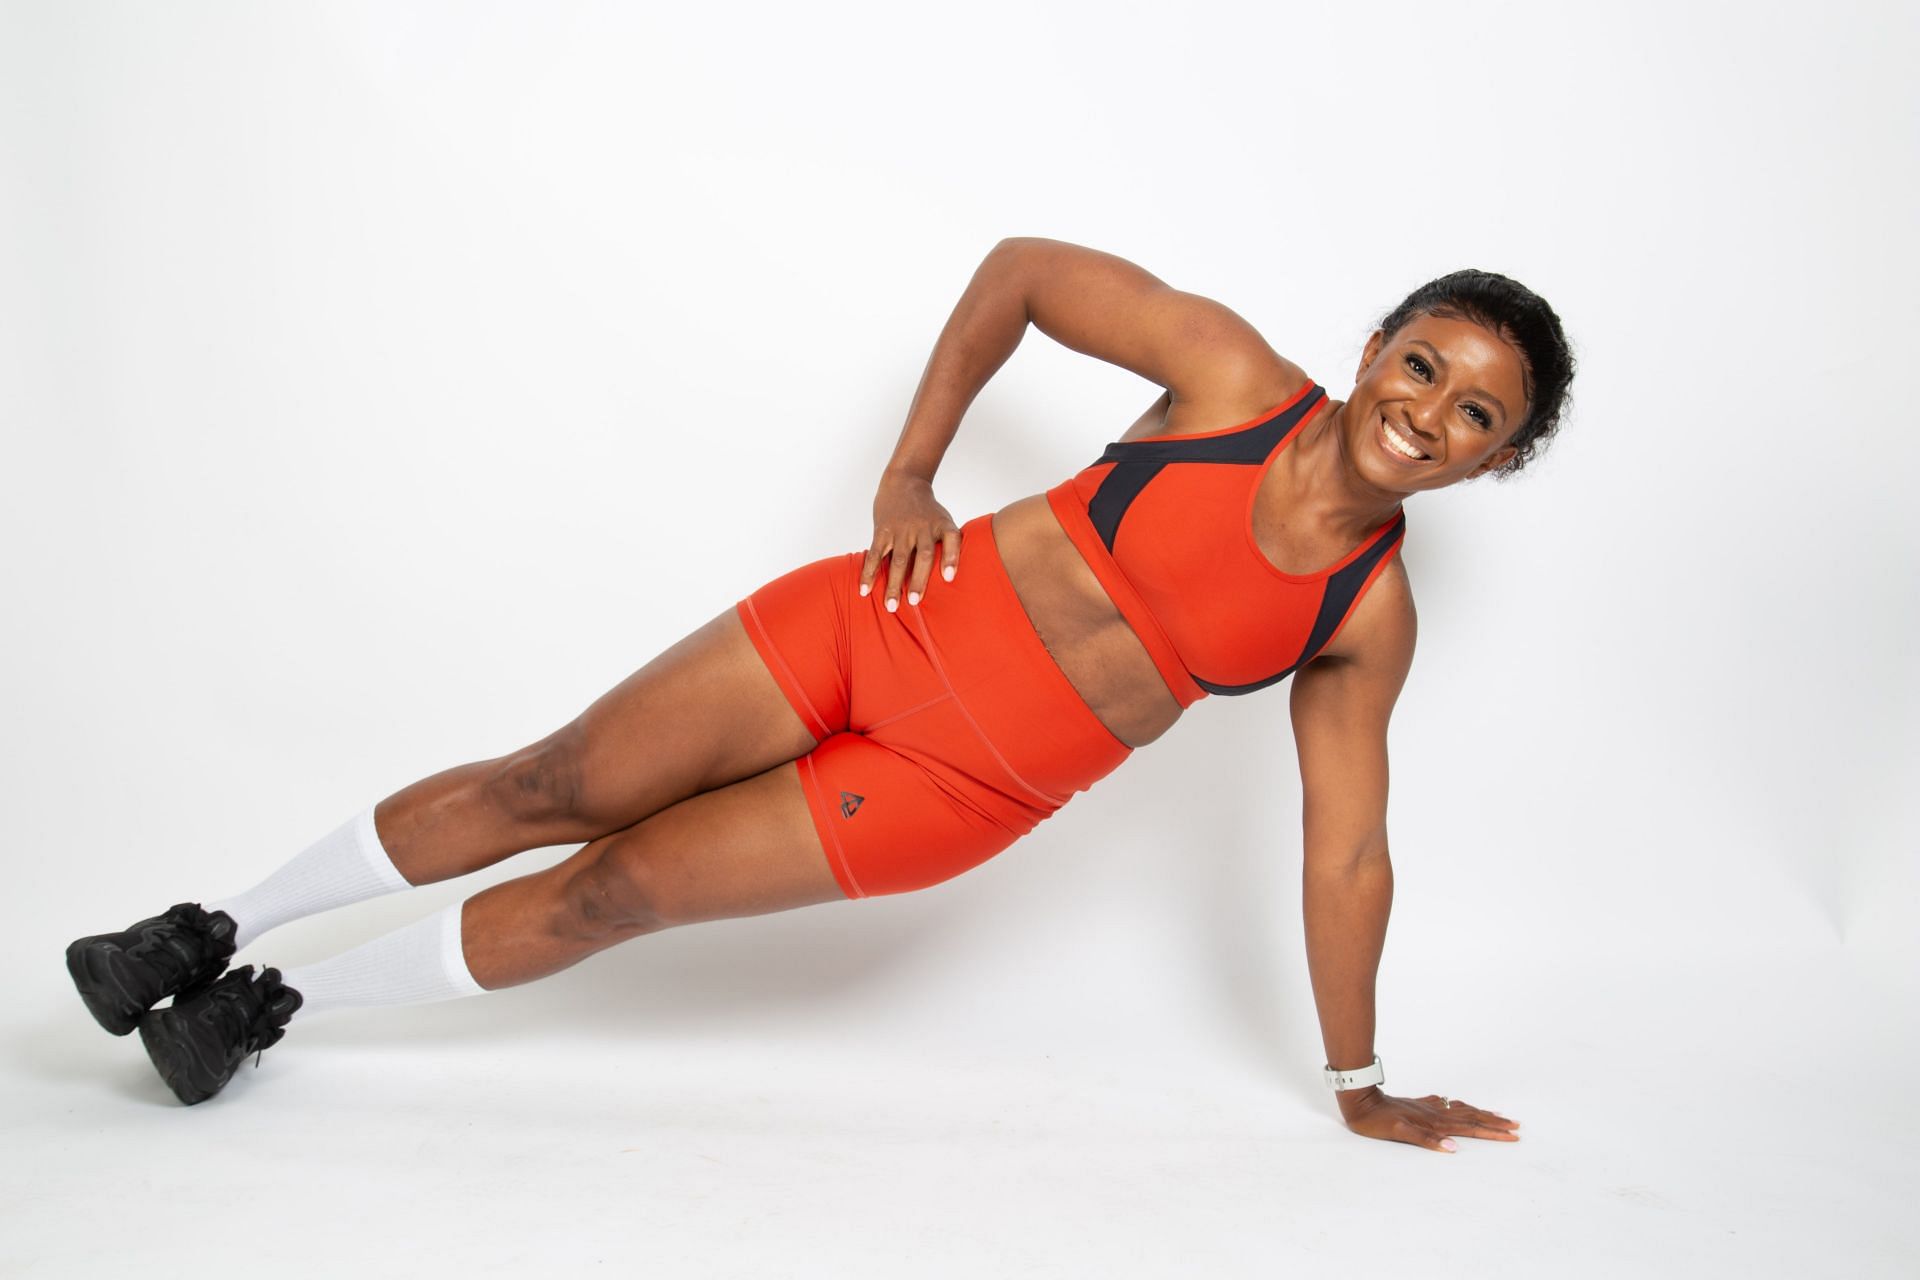 A woman performing the side plank, a popular core exercise, against a solid white backdrop.